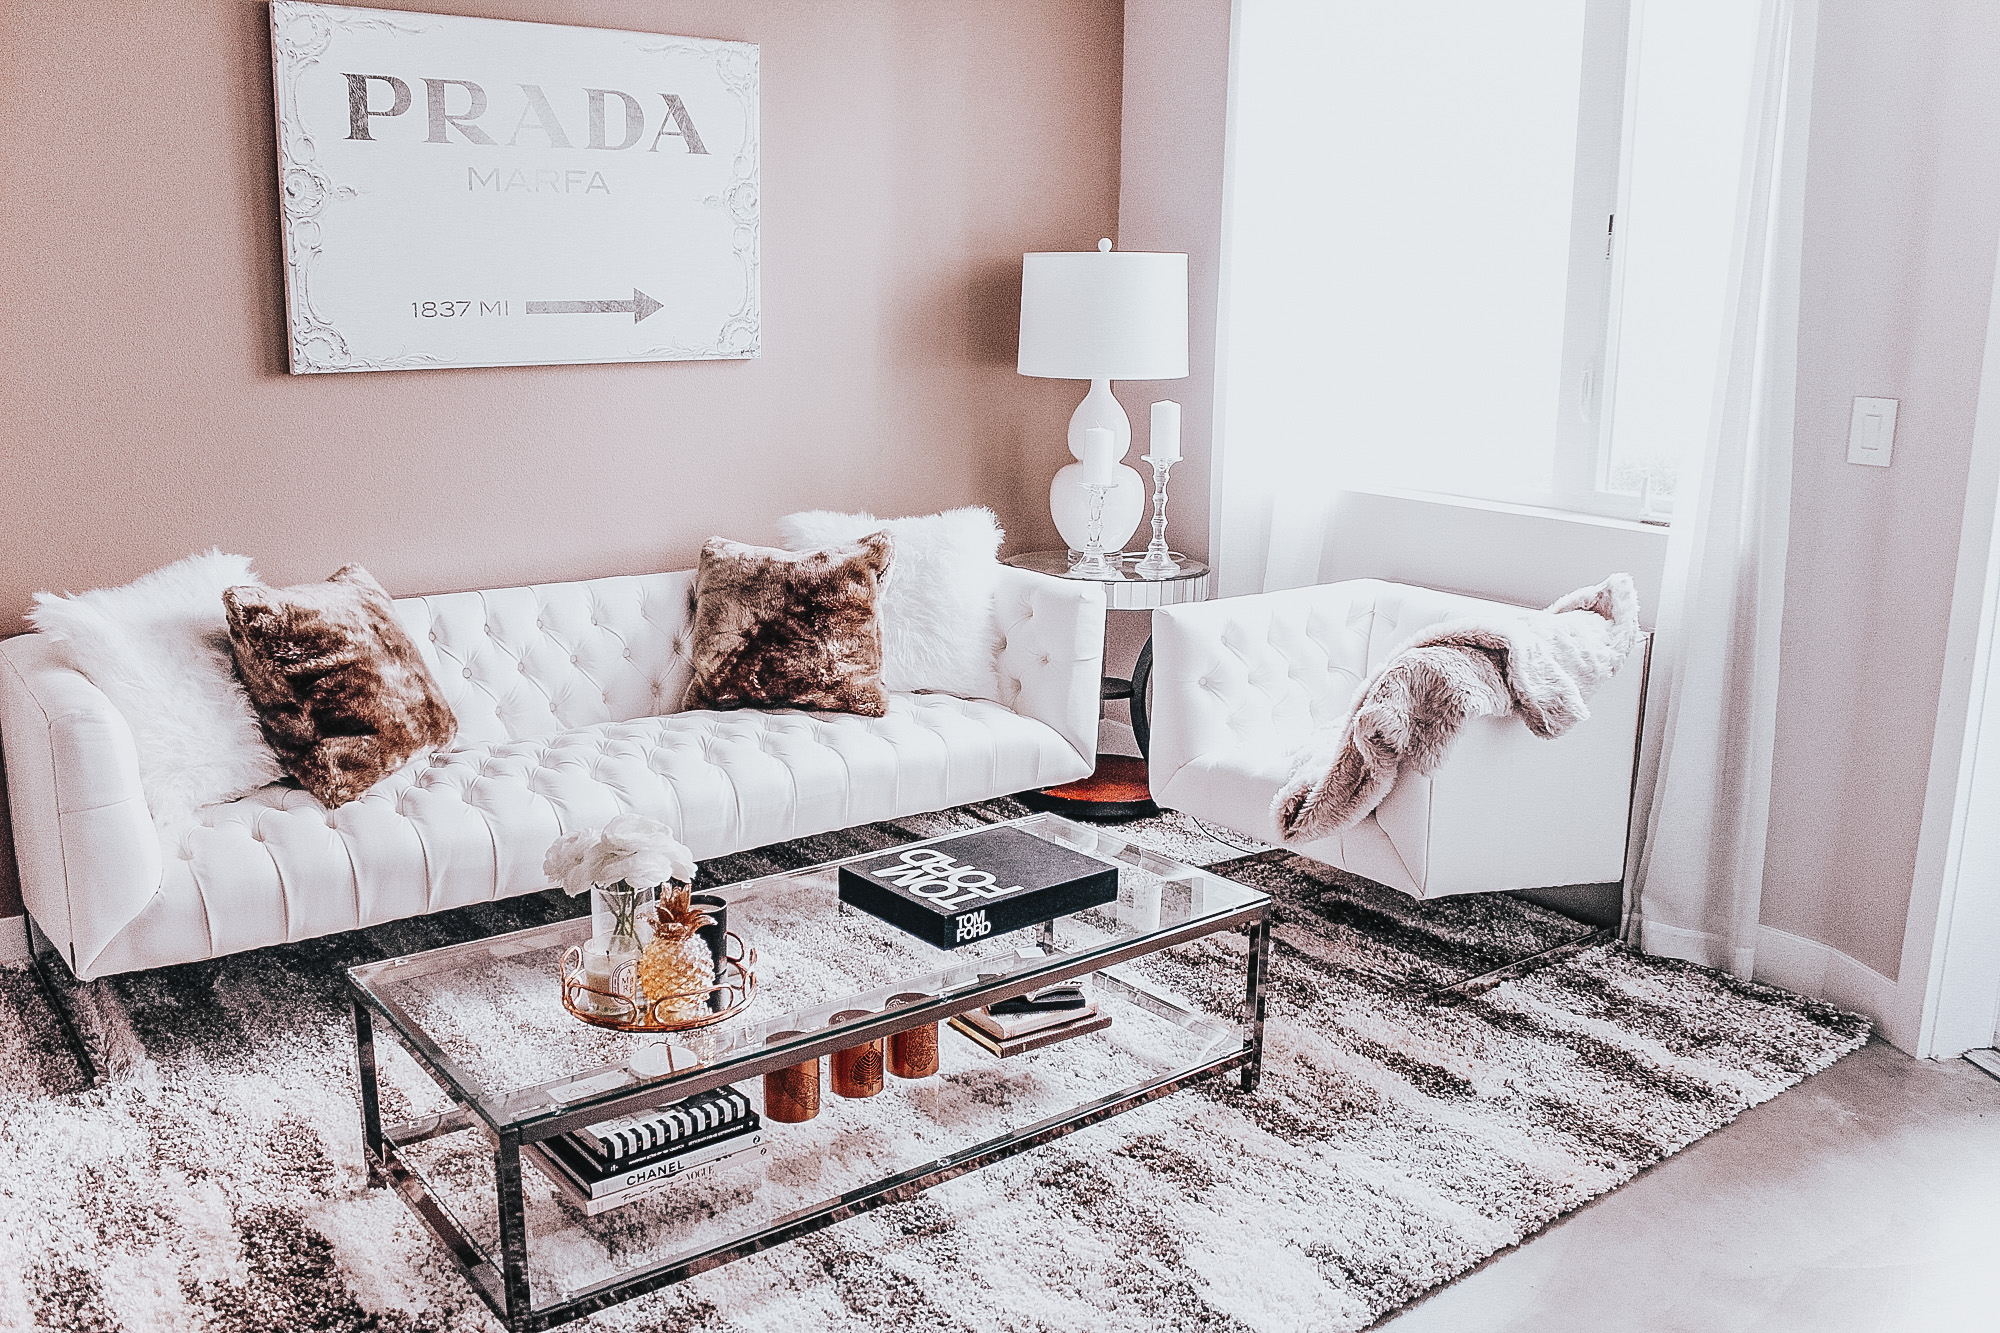 Blondie in the City Home Decor | White & Neutral Living Room | Hayley Larue Blog | Living Spaces | Z Gallerie | Prada Marfa Canvas